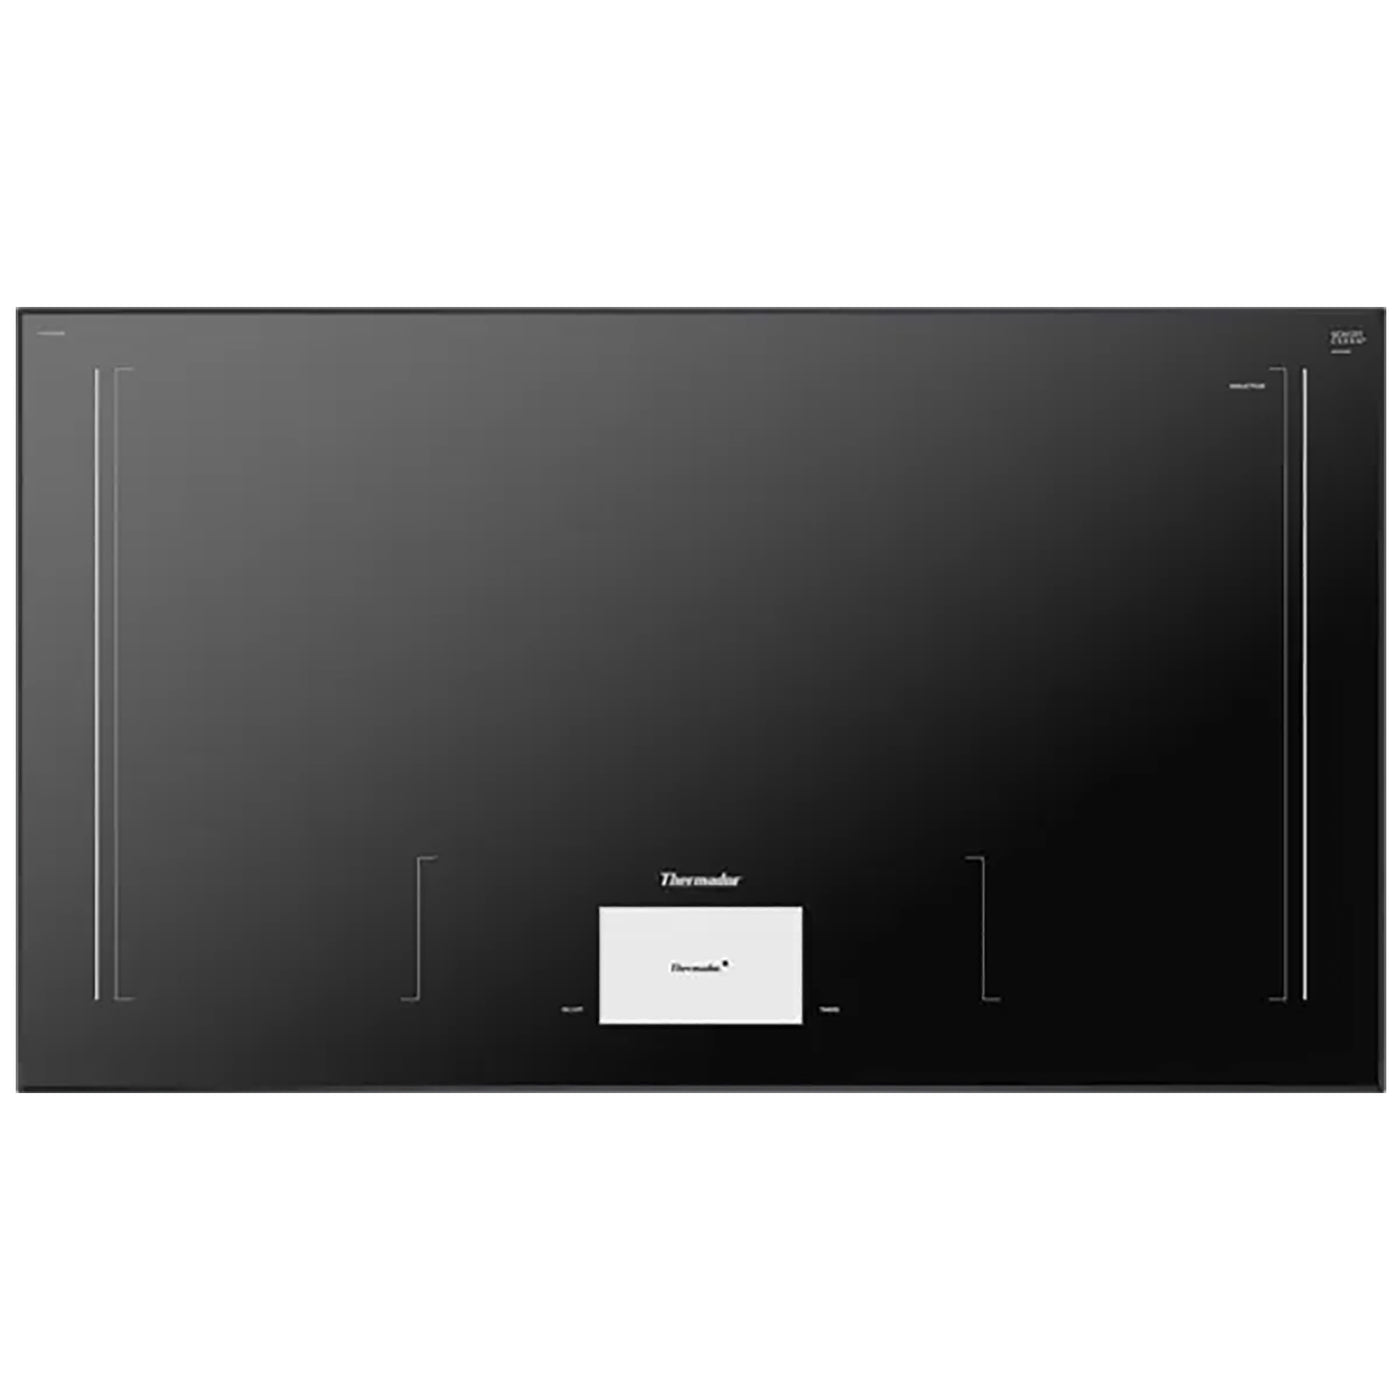 Thermador 36” Induction Cooktop